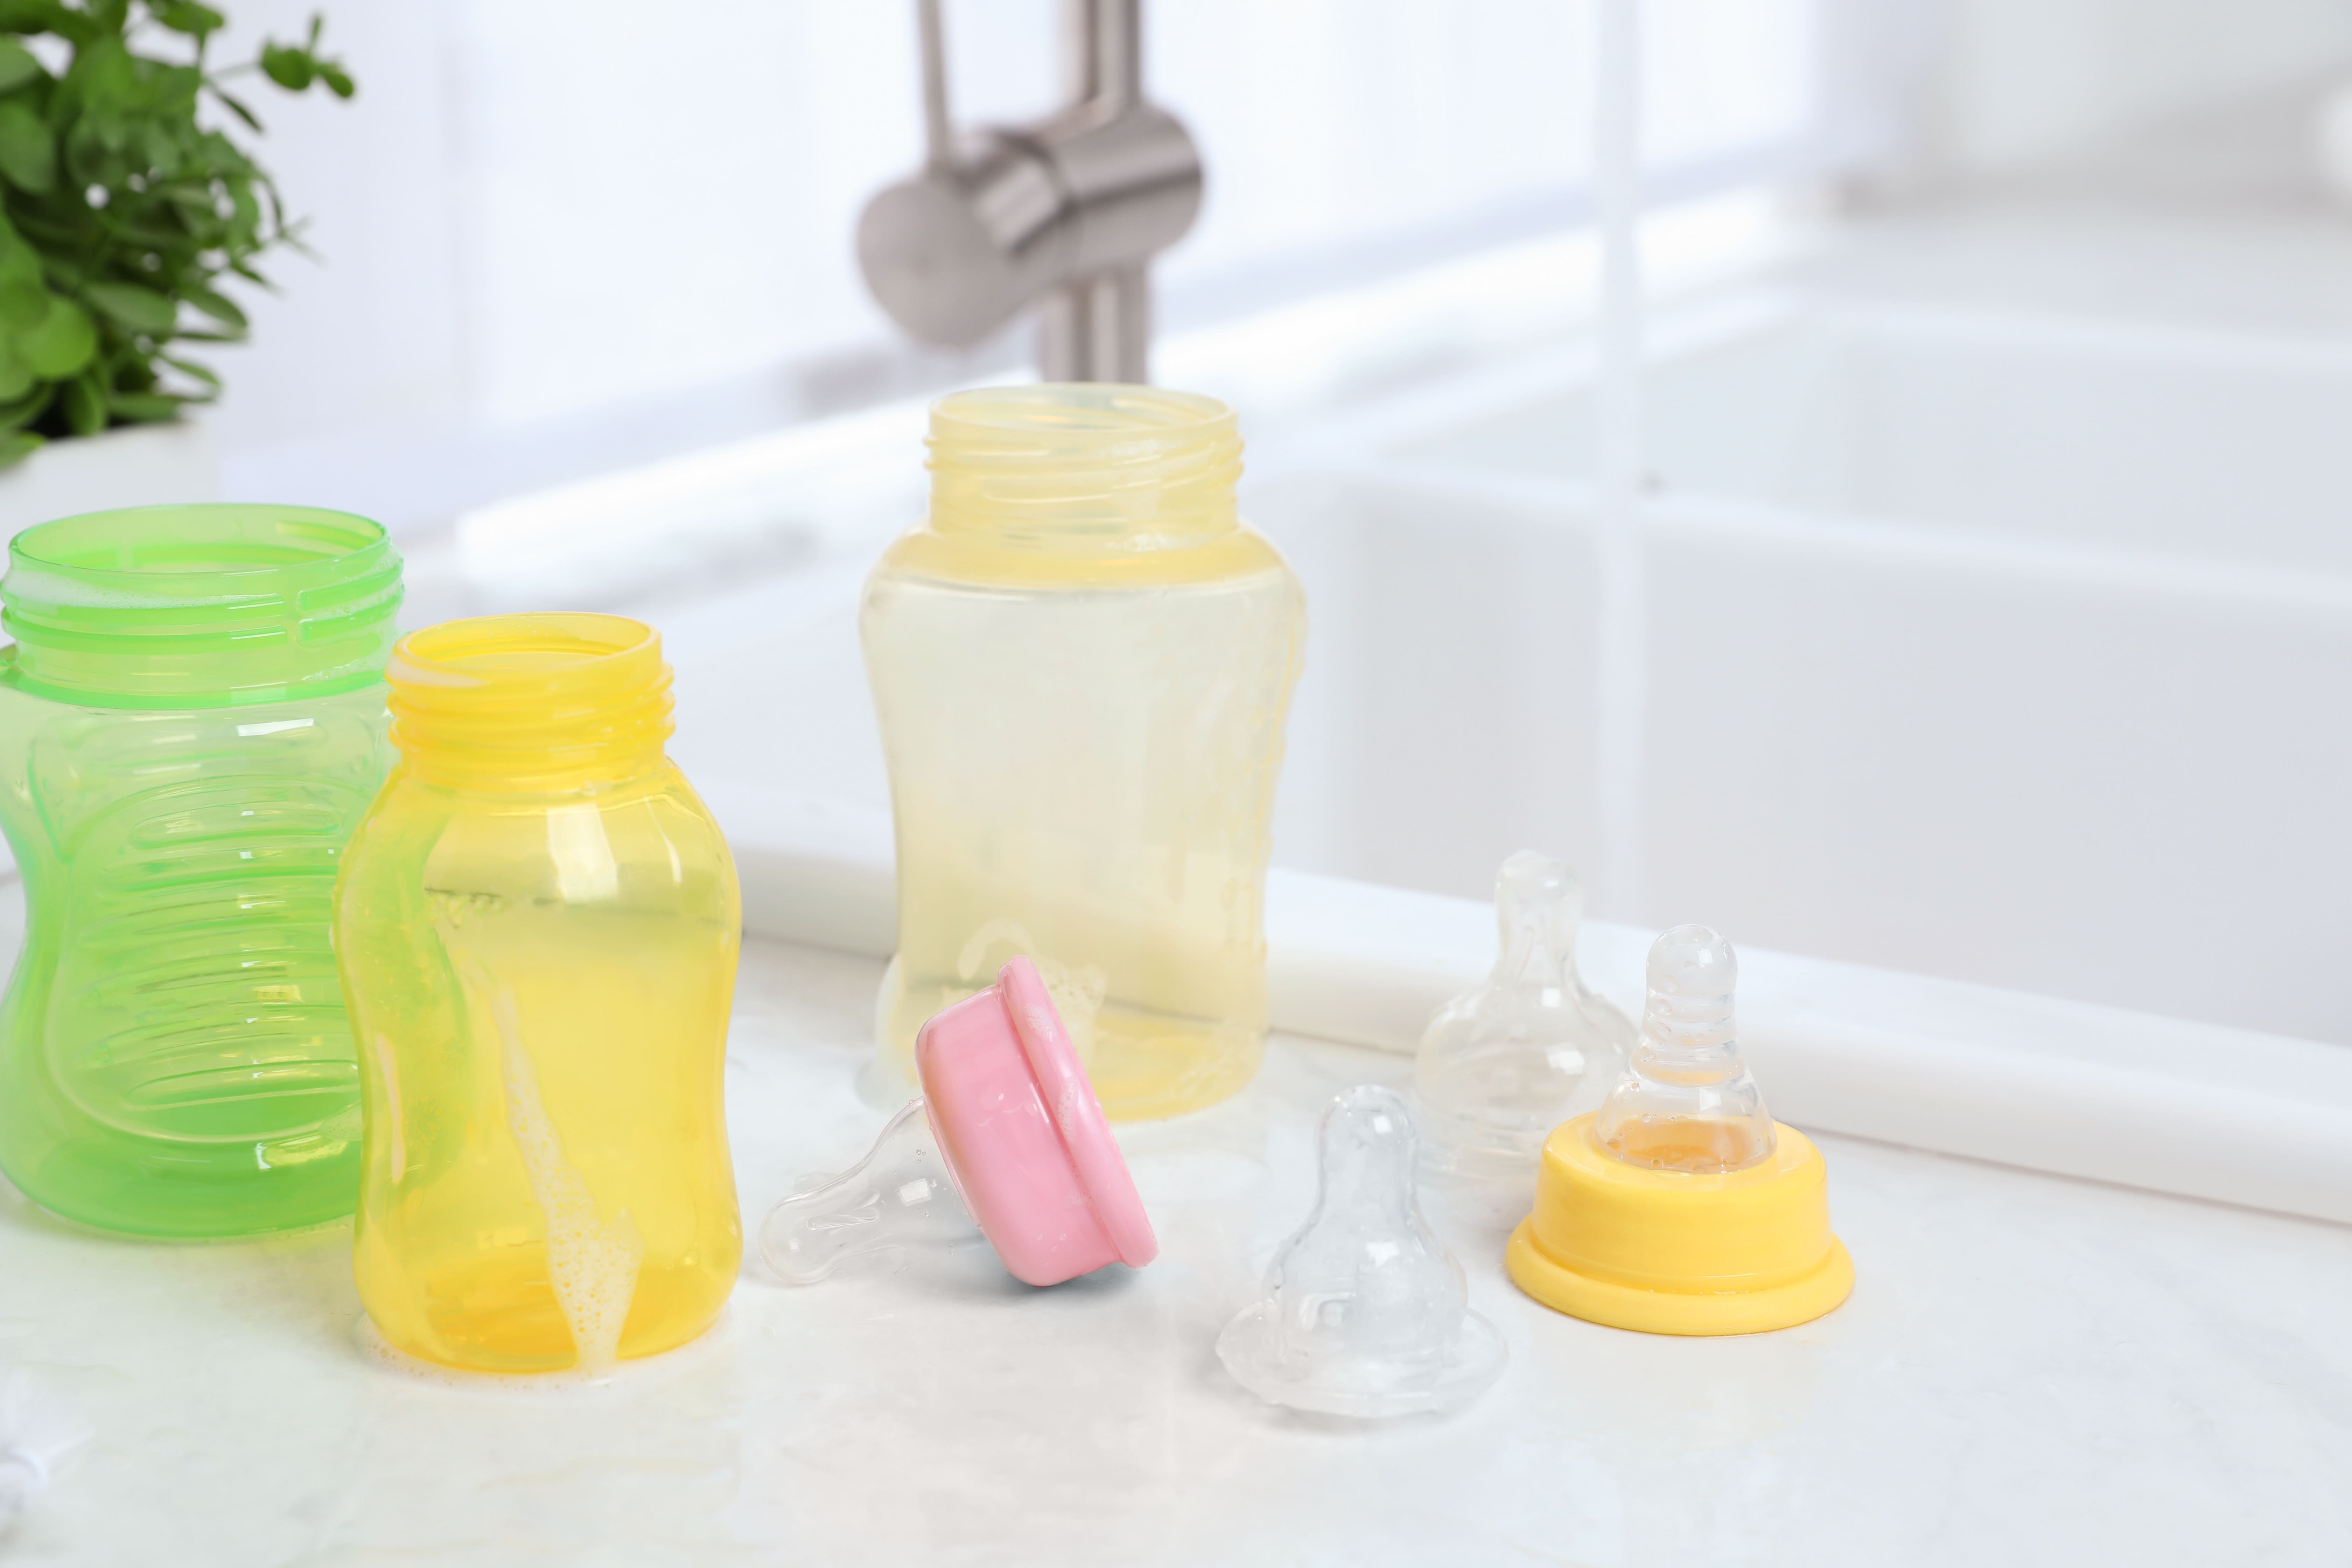 Baby bottles and nipples sit on a white countertop beside the kitchen sink after being washed.